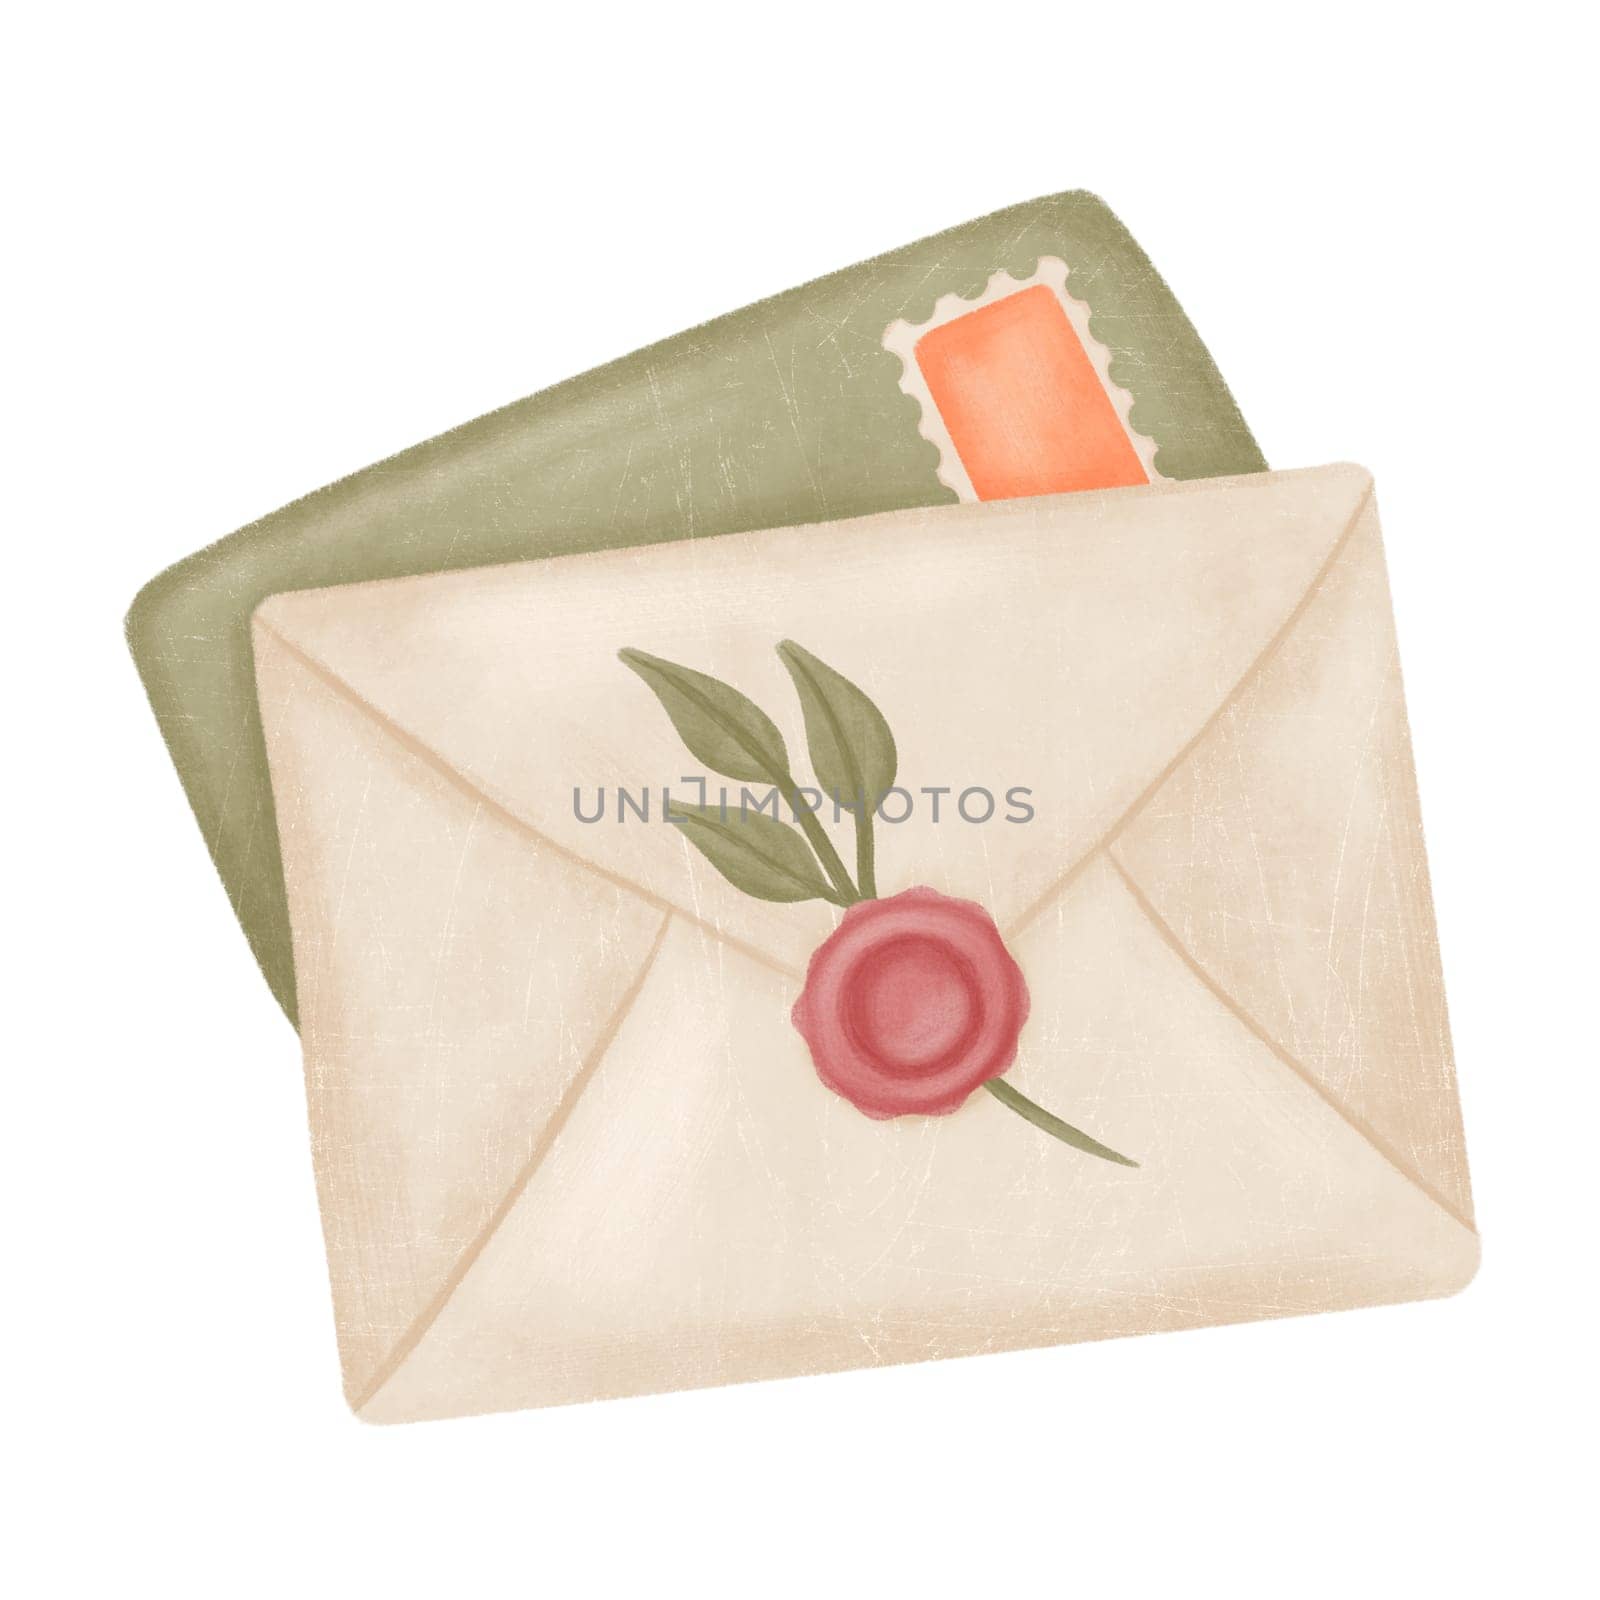 illustration of funky retro airmail envelope with stamp isolated on white background.